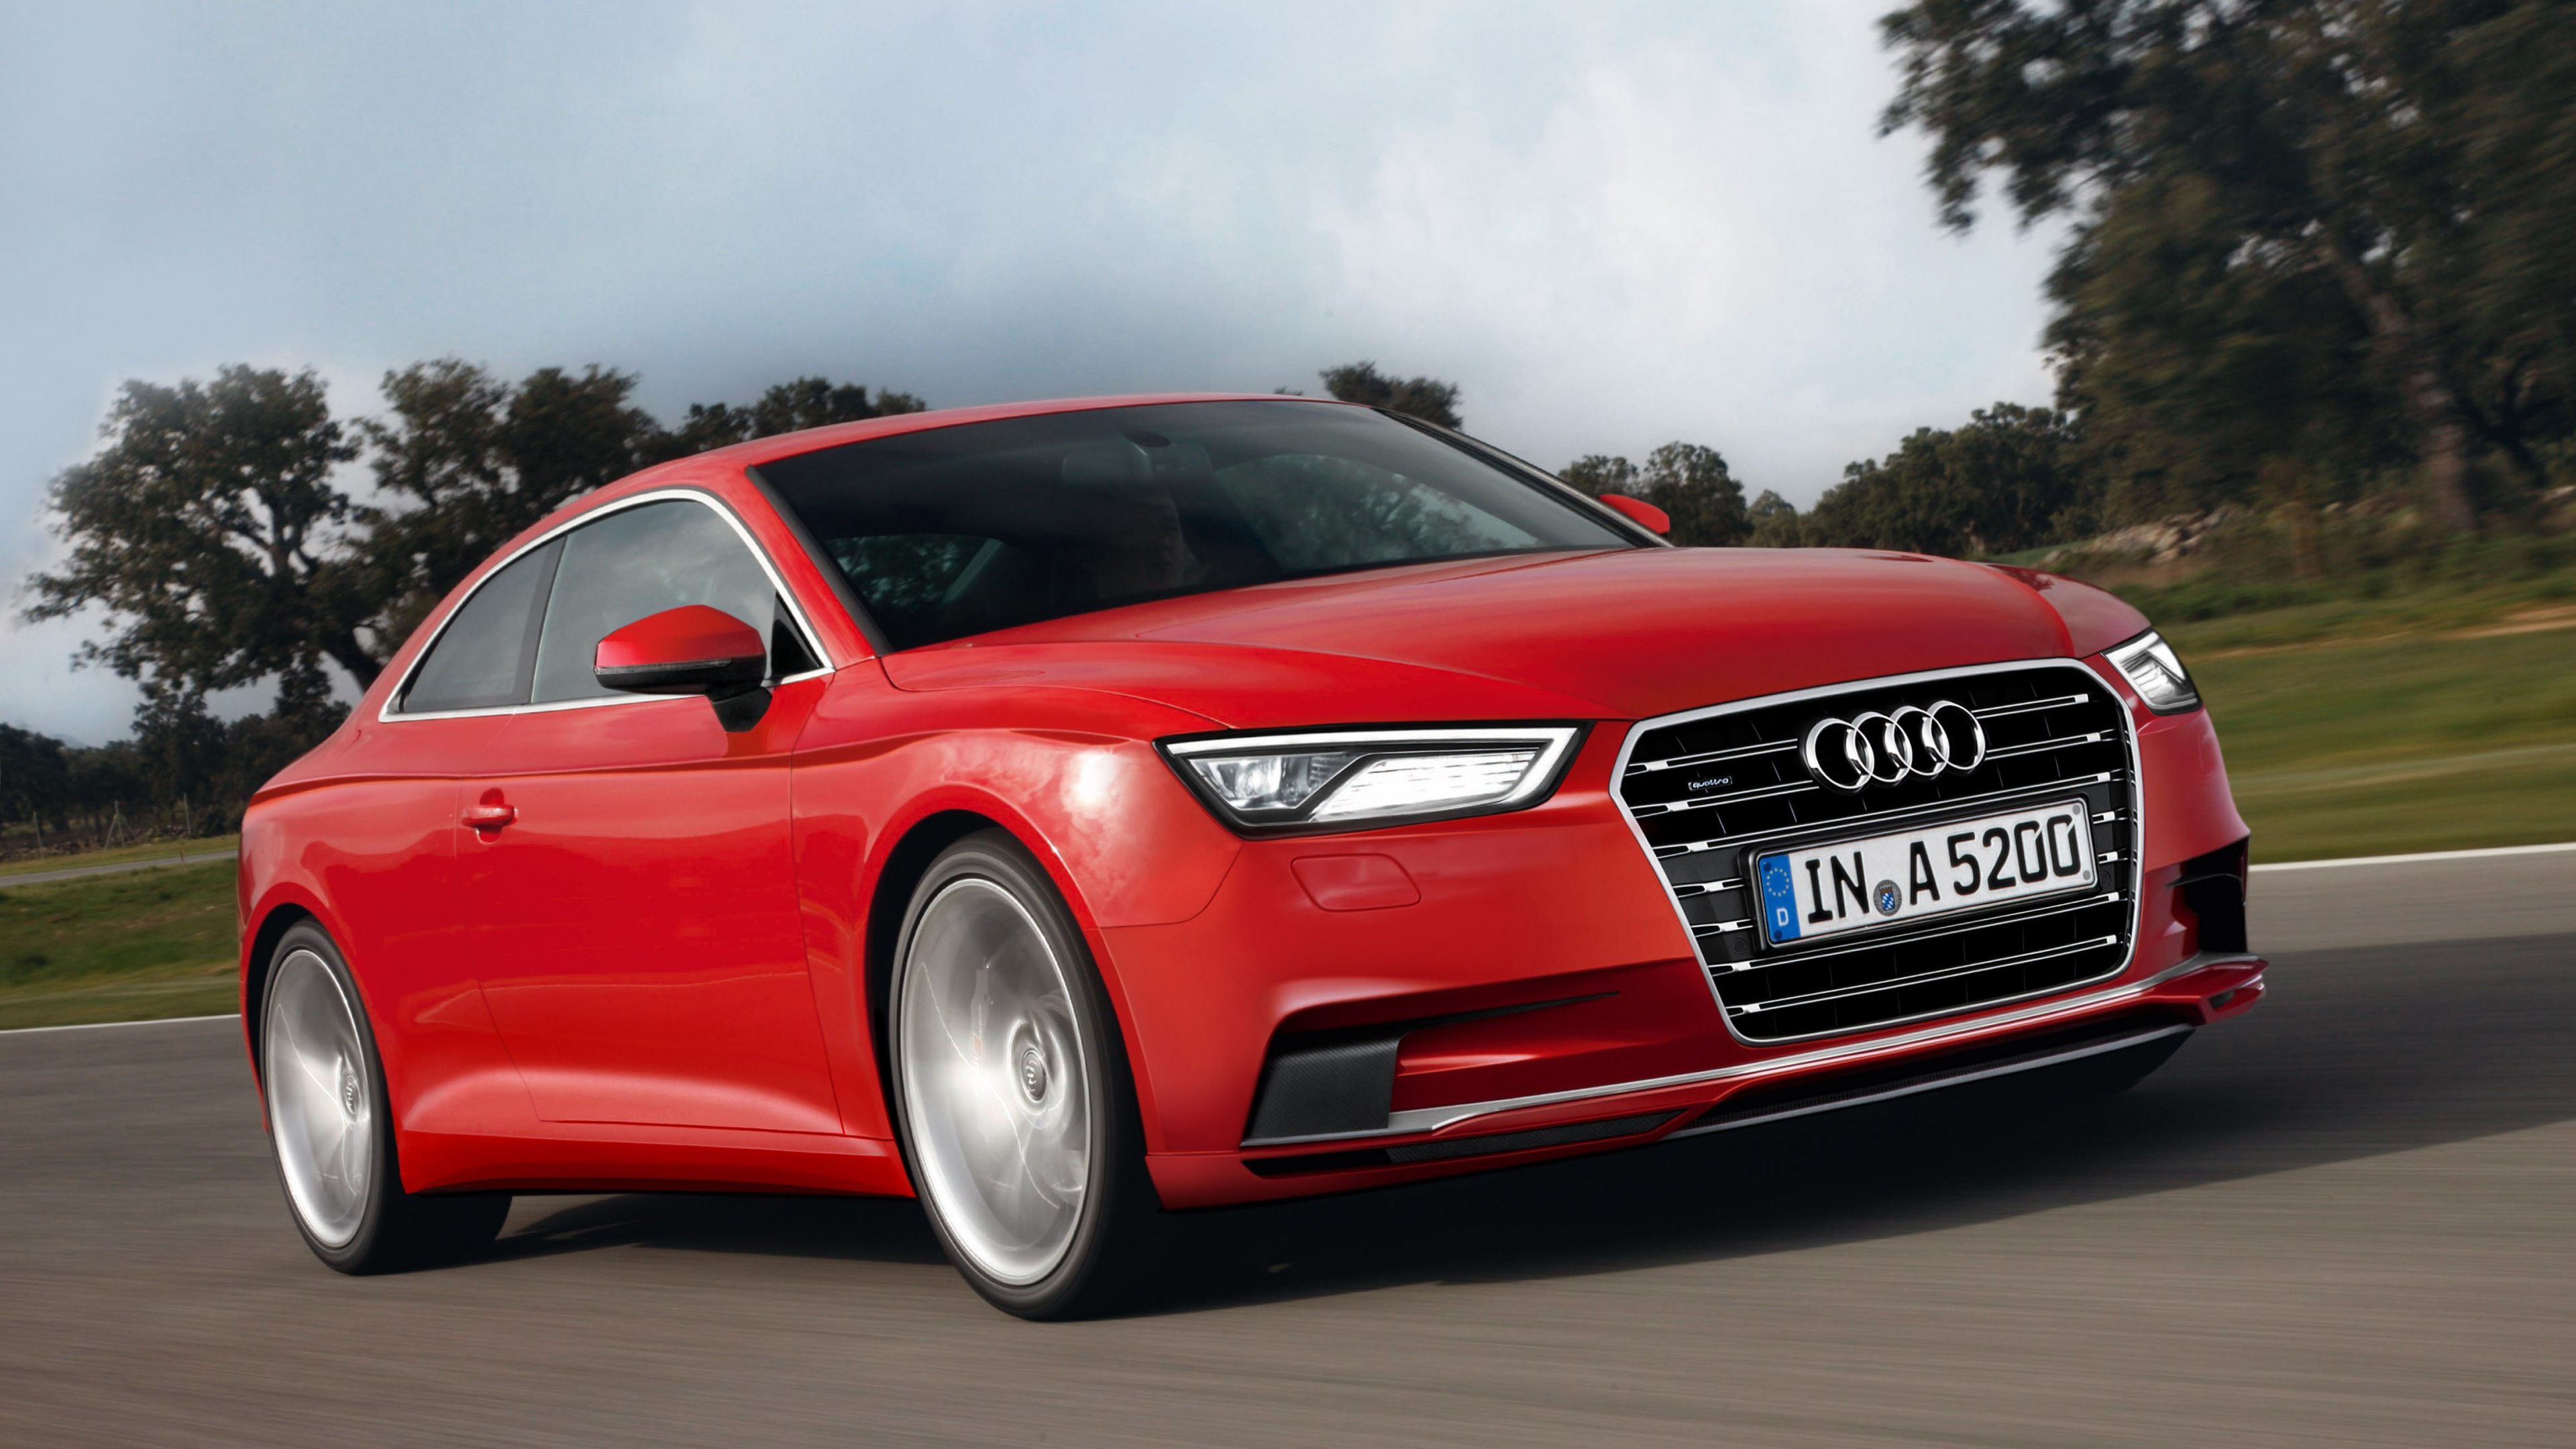 Red Audi Coupe on Road. Wallpaper in 3840x2160 Resolution